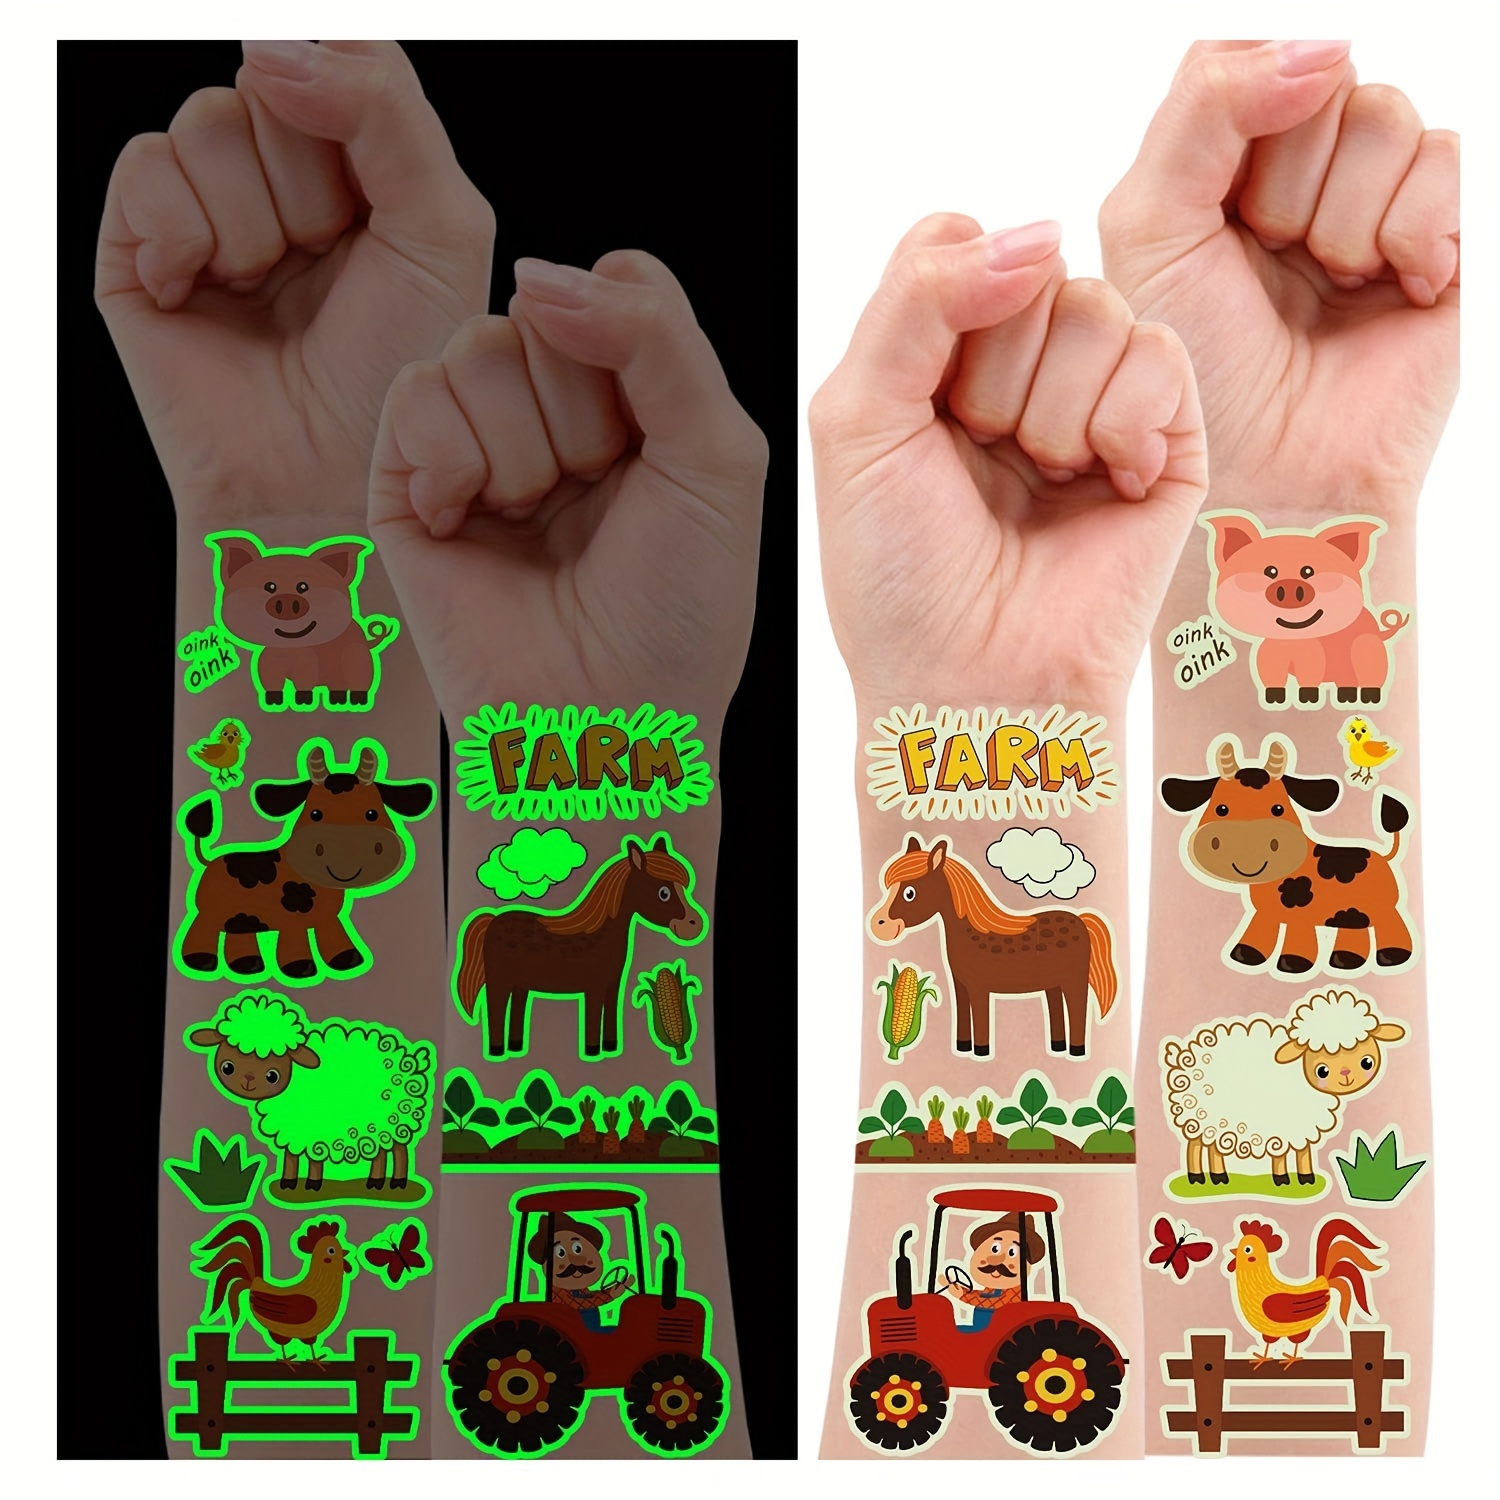 

165 Styles (12 Sheets) Glow Farm Animal Birthday Party Supplies Temporary Tattoos, Luminous Farm Party Decorations Favors, Glow Farm Tattoos Stickers Featuring Cow Horse Pig